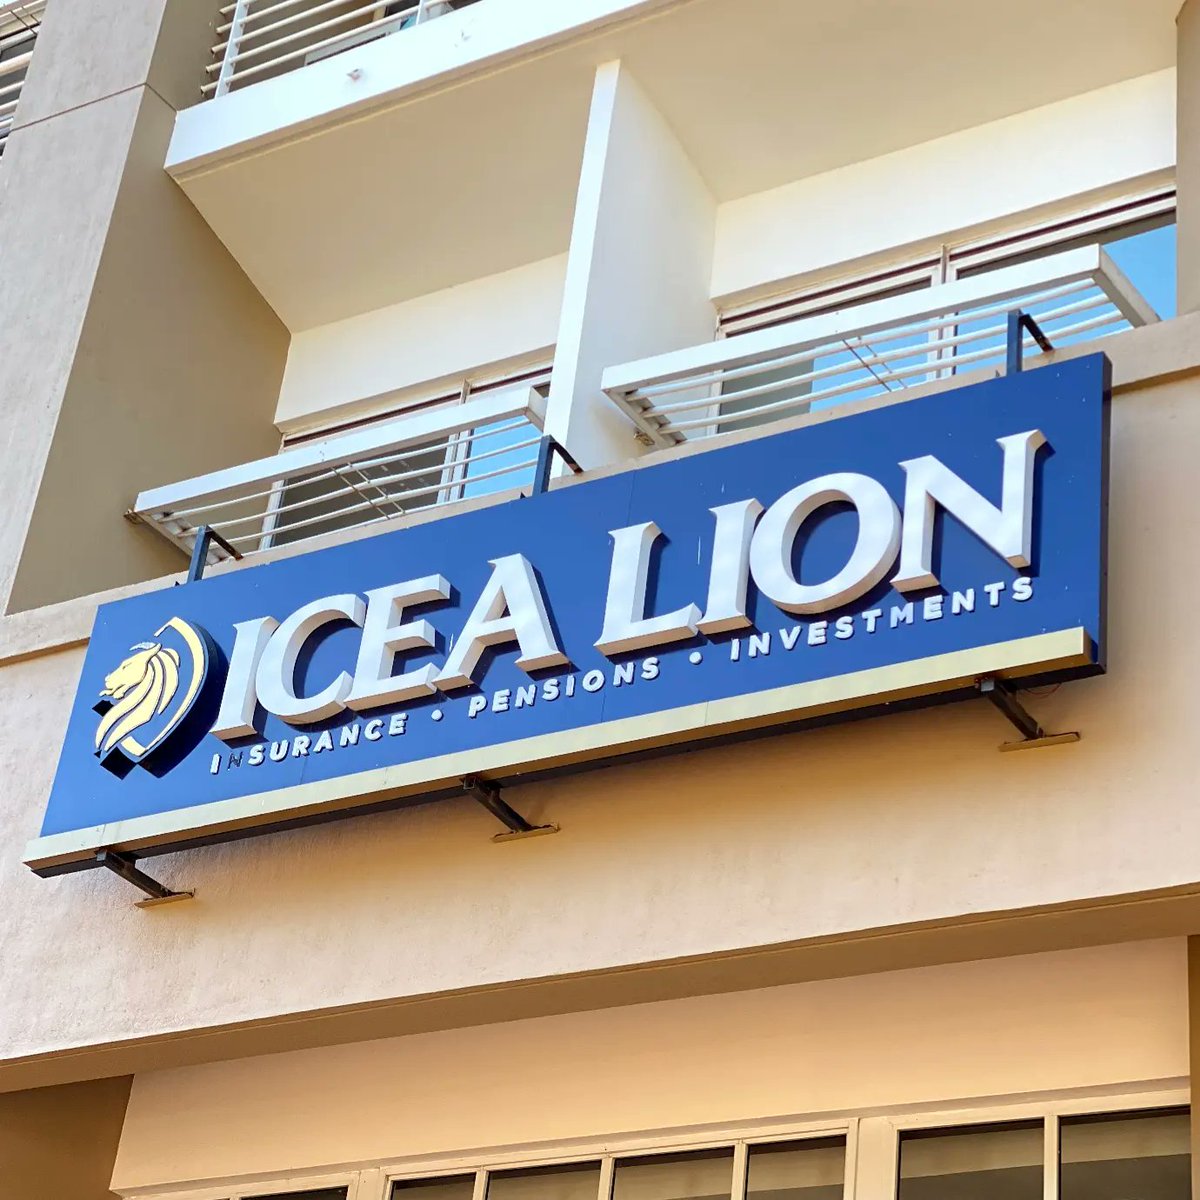 3D signage by @WiseMediaUG2  and we're taking this opportunity to thank @icealionug  and the team for your trust and partnership. Your business means a lot to us, and we are grateful for the opportunity to work with you. 

#3DSignage #iceaug #BetterTogether  #wisegroup